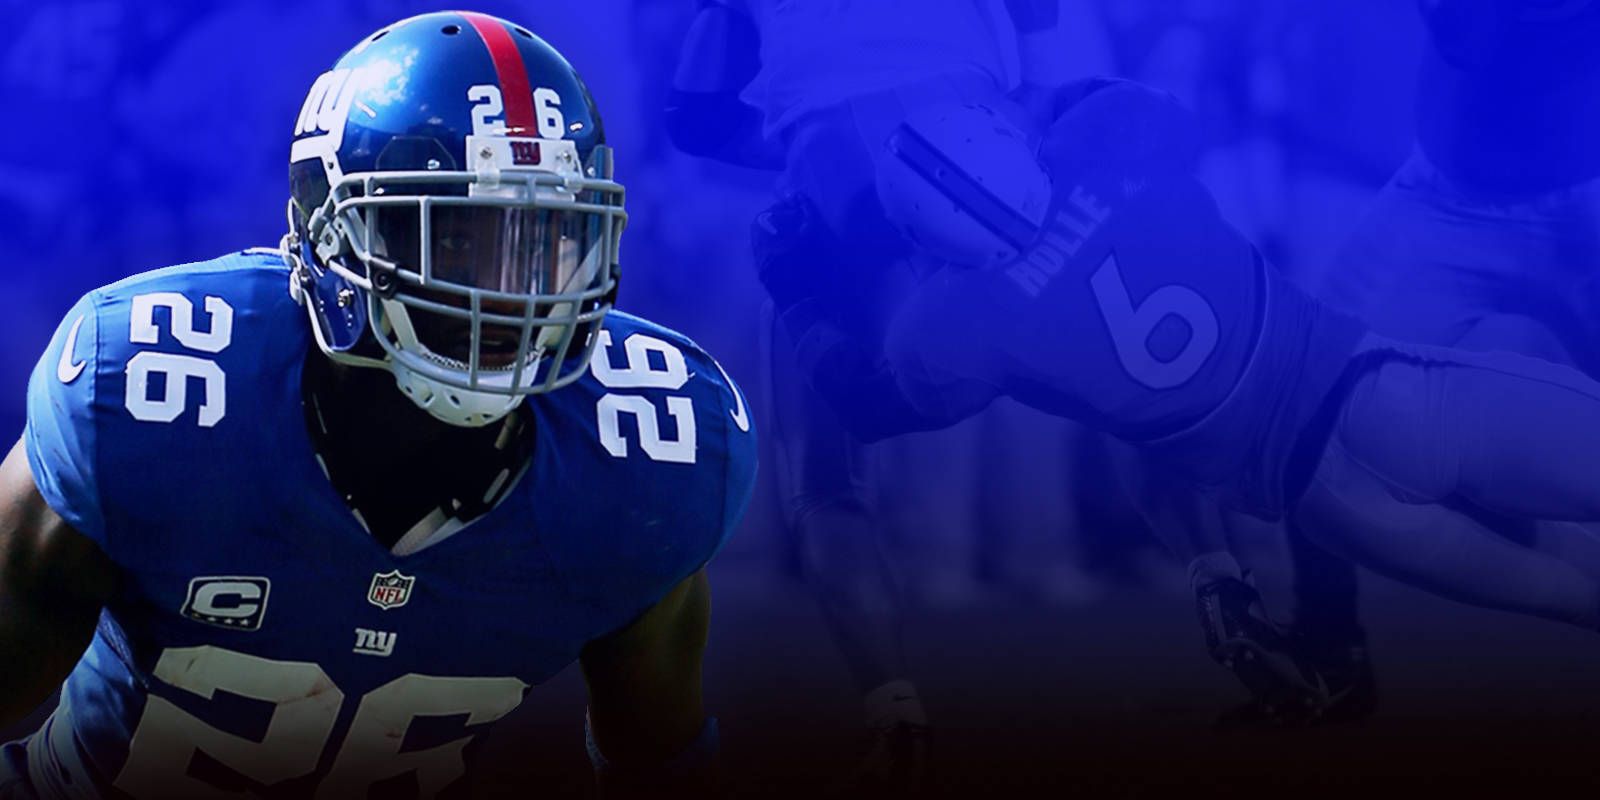 #ProCanes Interview: @Giants DB Antrel Rolle